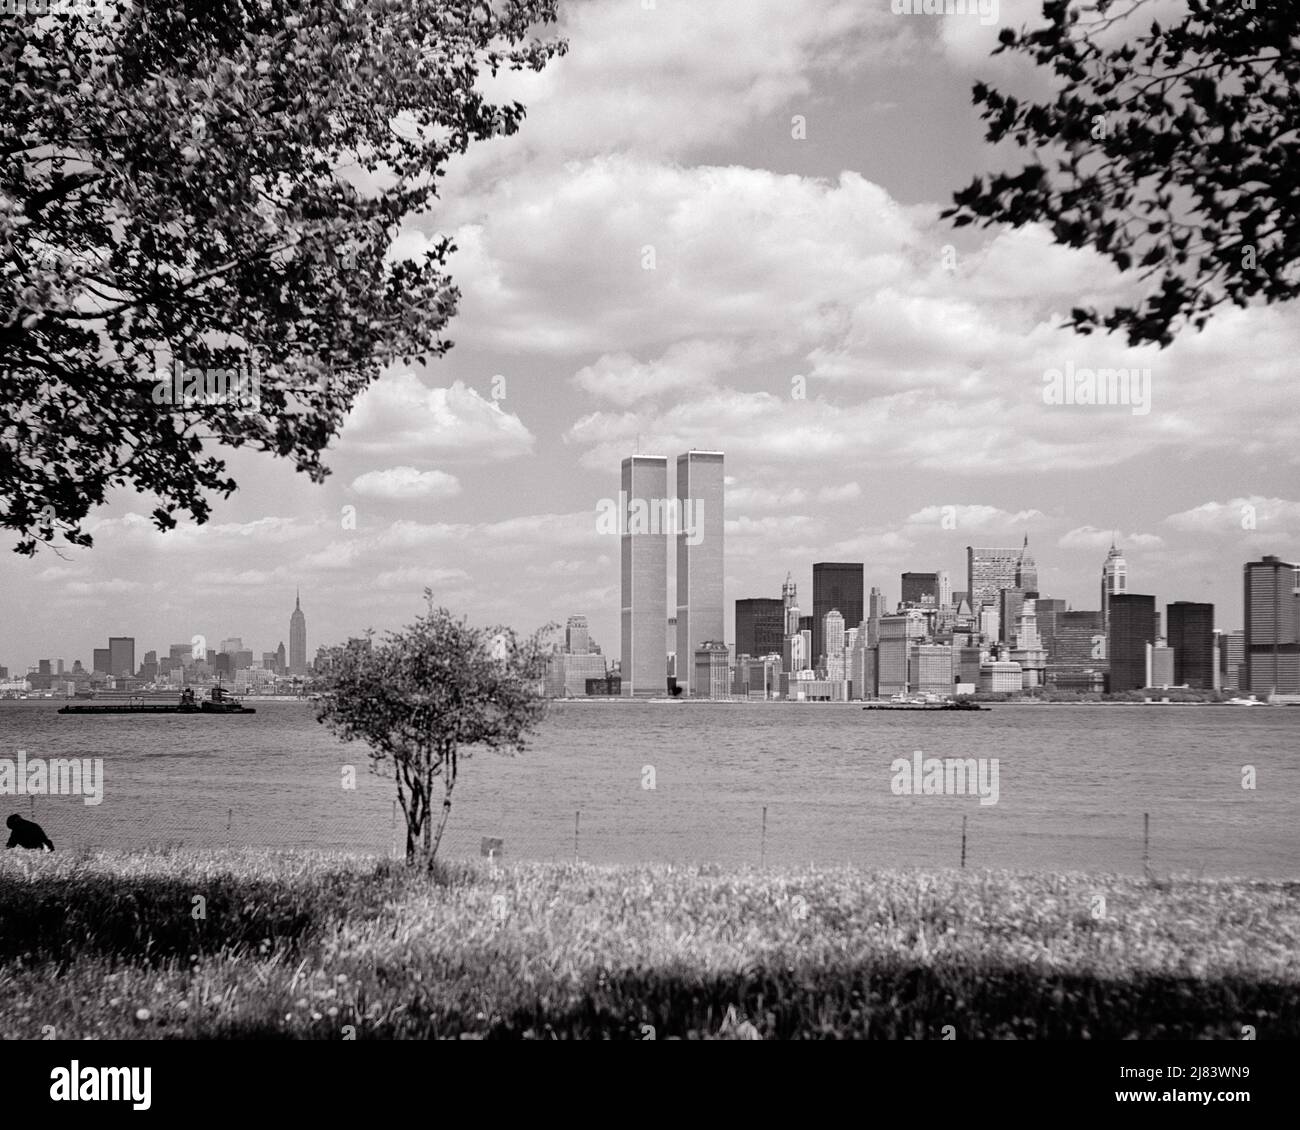 1970s MANHATTAN SKYLINE FROM LIBERTY ISLAND VIEW DOWNTOWN WORLD TRADE CENTER AND EMPIRE STATE BUILDING MIDTOWN IN DISTANCE - r24162 HAR001 HARS STRUCTURE PROPERTY AND NYC REAL ESTATE 911 EMPIRE STATE NEW YORK STRUCTURES CITIES TERRORISM BEFORE 911 EDIFICE NEW YORK CITY PANORAMIC TRADE WORLD TRADE TOWERS SEASON WORLD TRADE CENTER BLACK AND WHITE DESTROYED HAR001 HUDSON RIVER OLD FASHIONED SEPTEMBER 11 2001 TWIN TOWERS WEST SIDE WTC Stock Photo